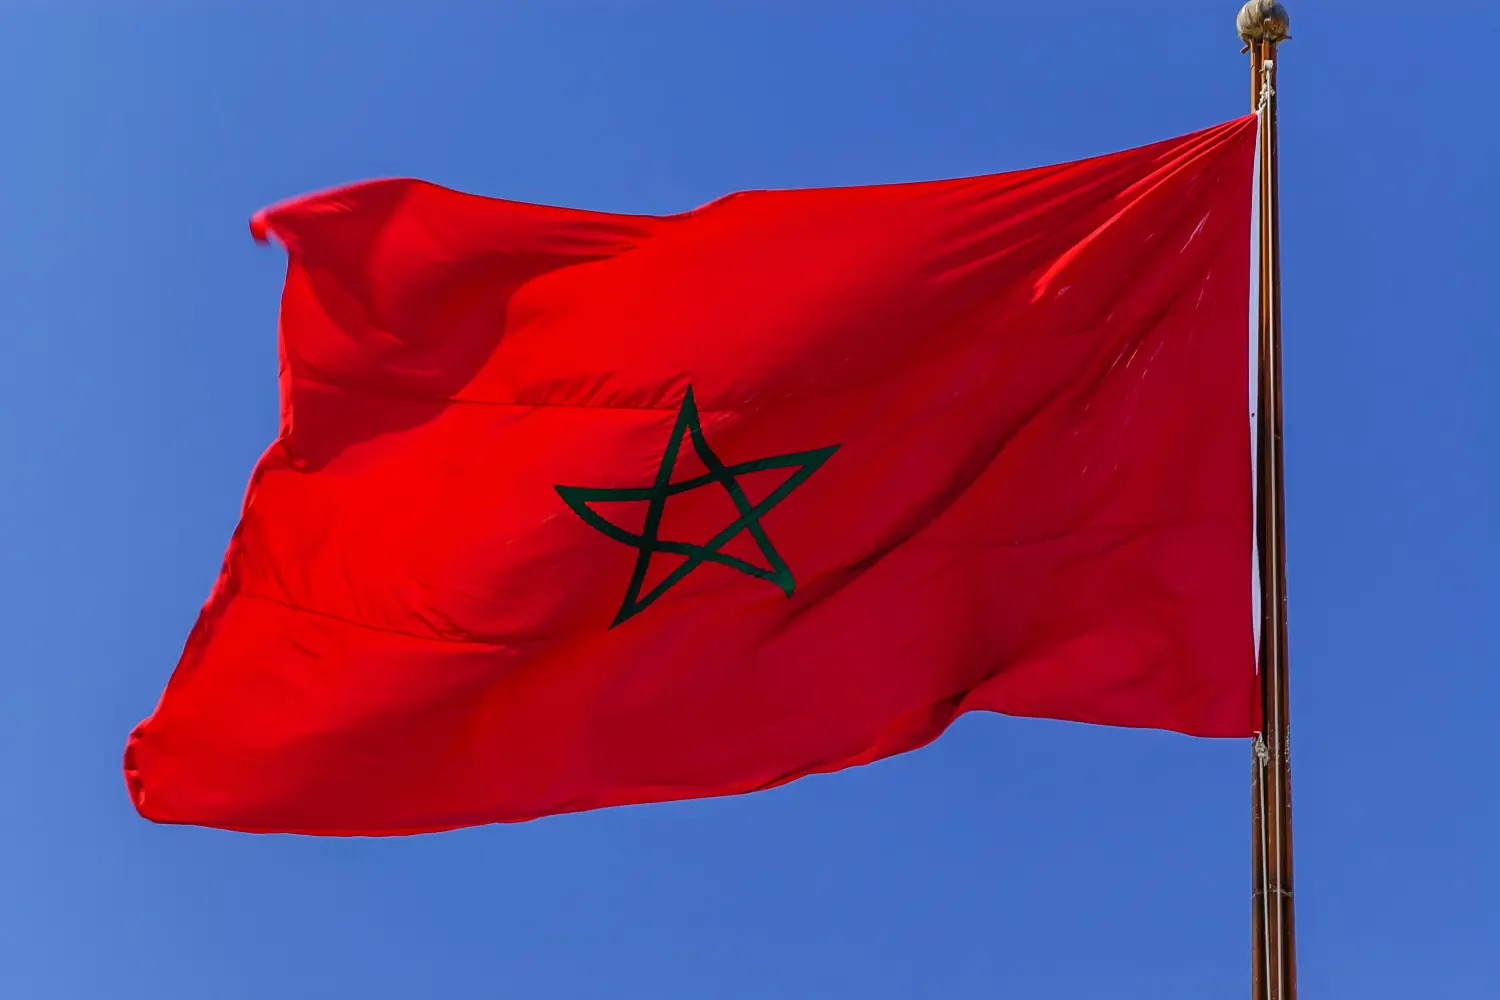 Moroccan ferries - Moroccan flag